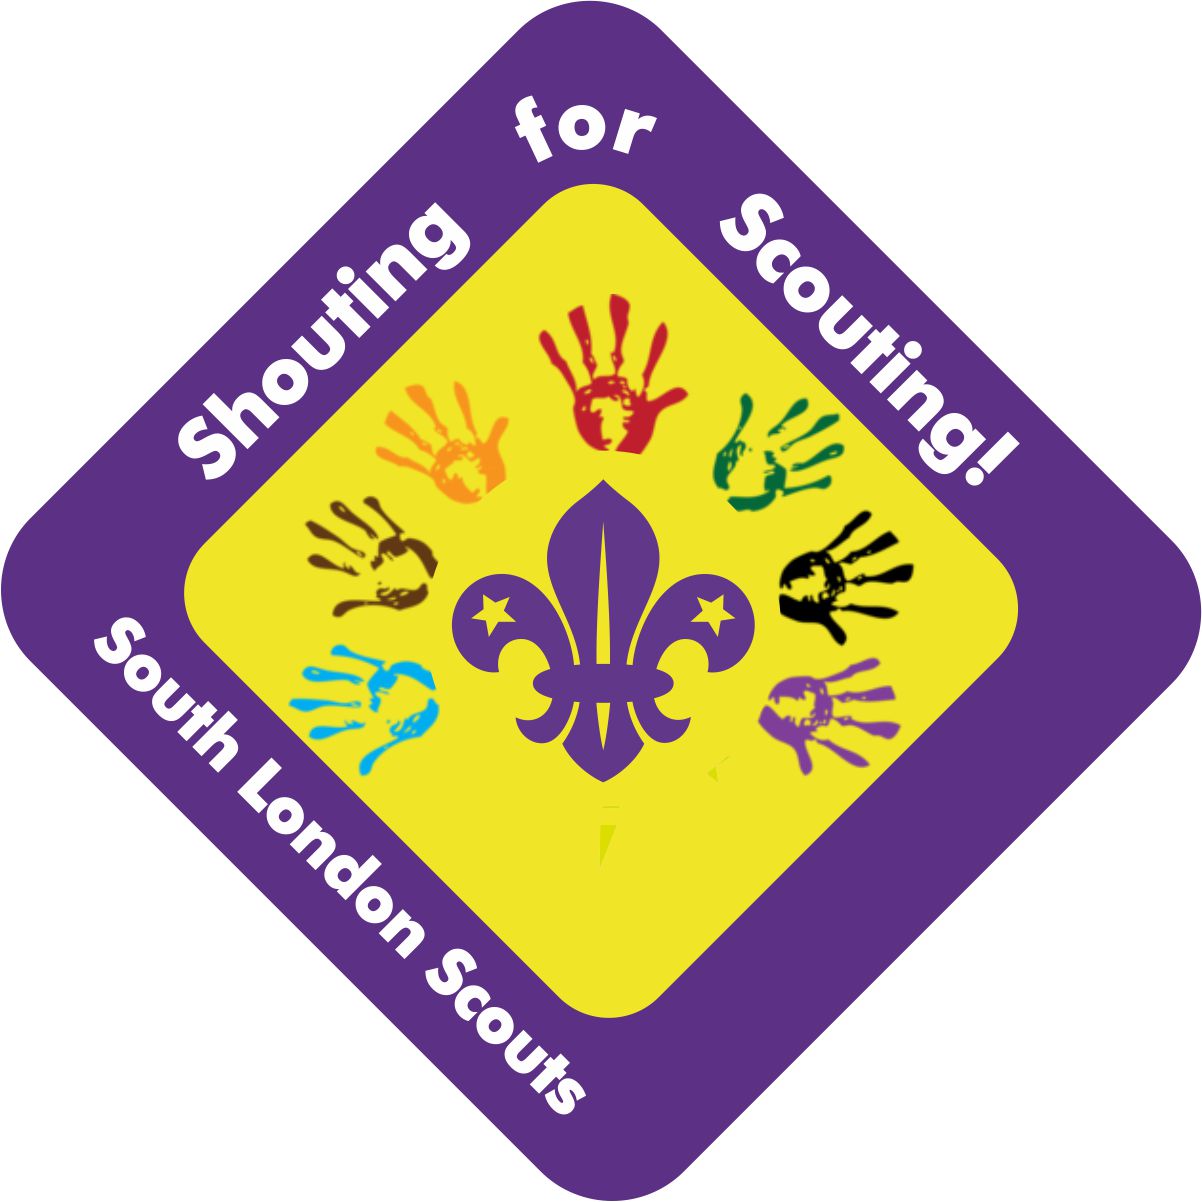 Scouting about Scouting badge